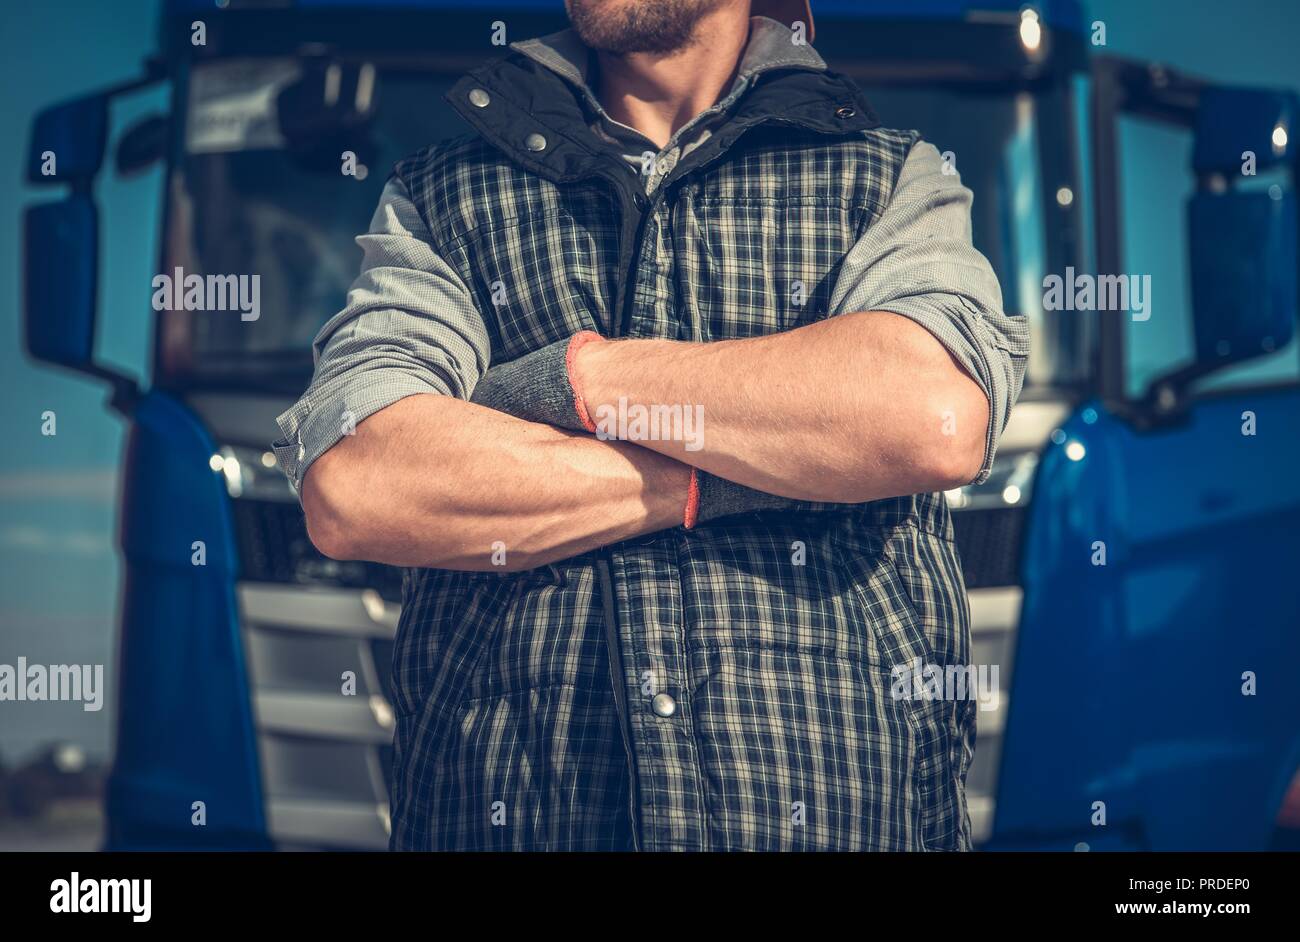 Truck Driver Workhorse. Caucasian Men in Front of His Vehicle with Crossing Arms. Powerful Transportation Industry Concept. Stock Photo